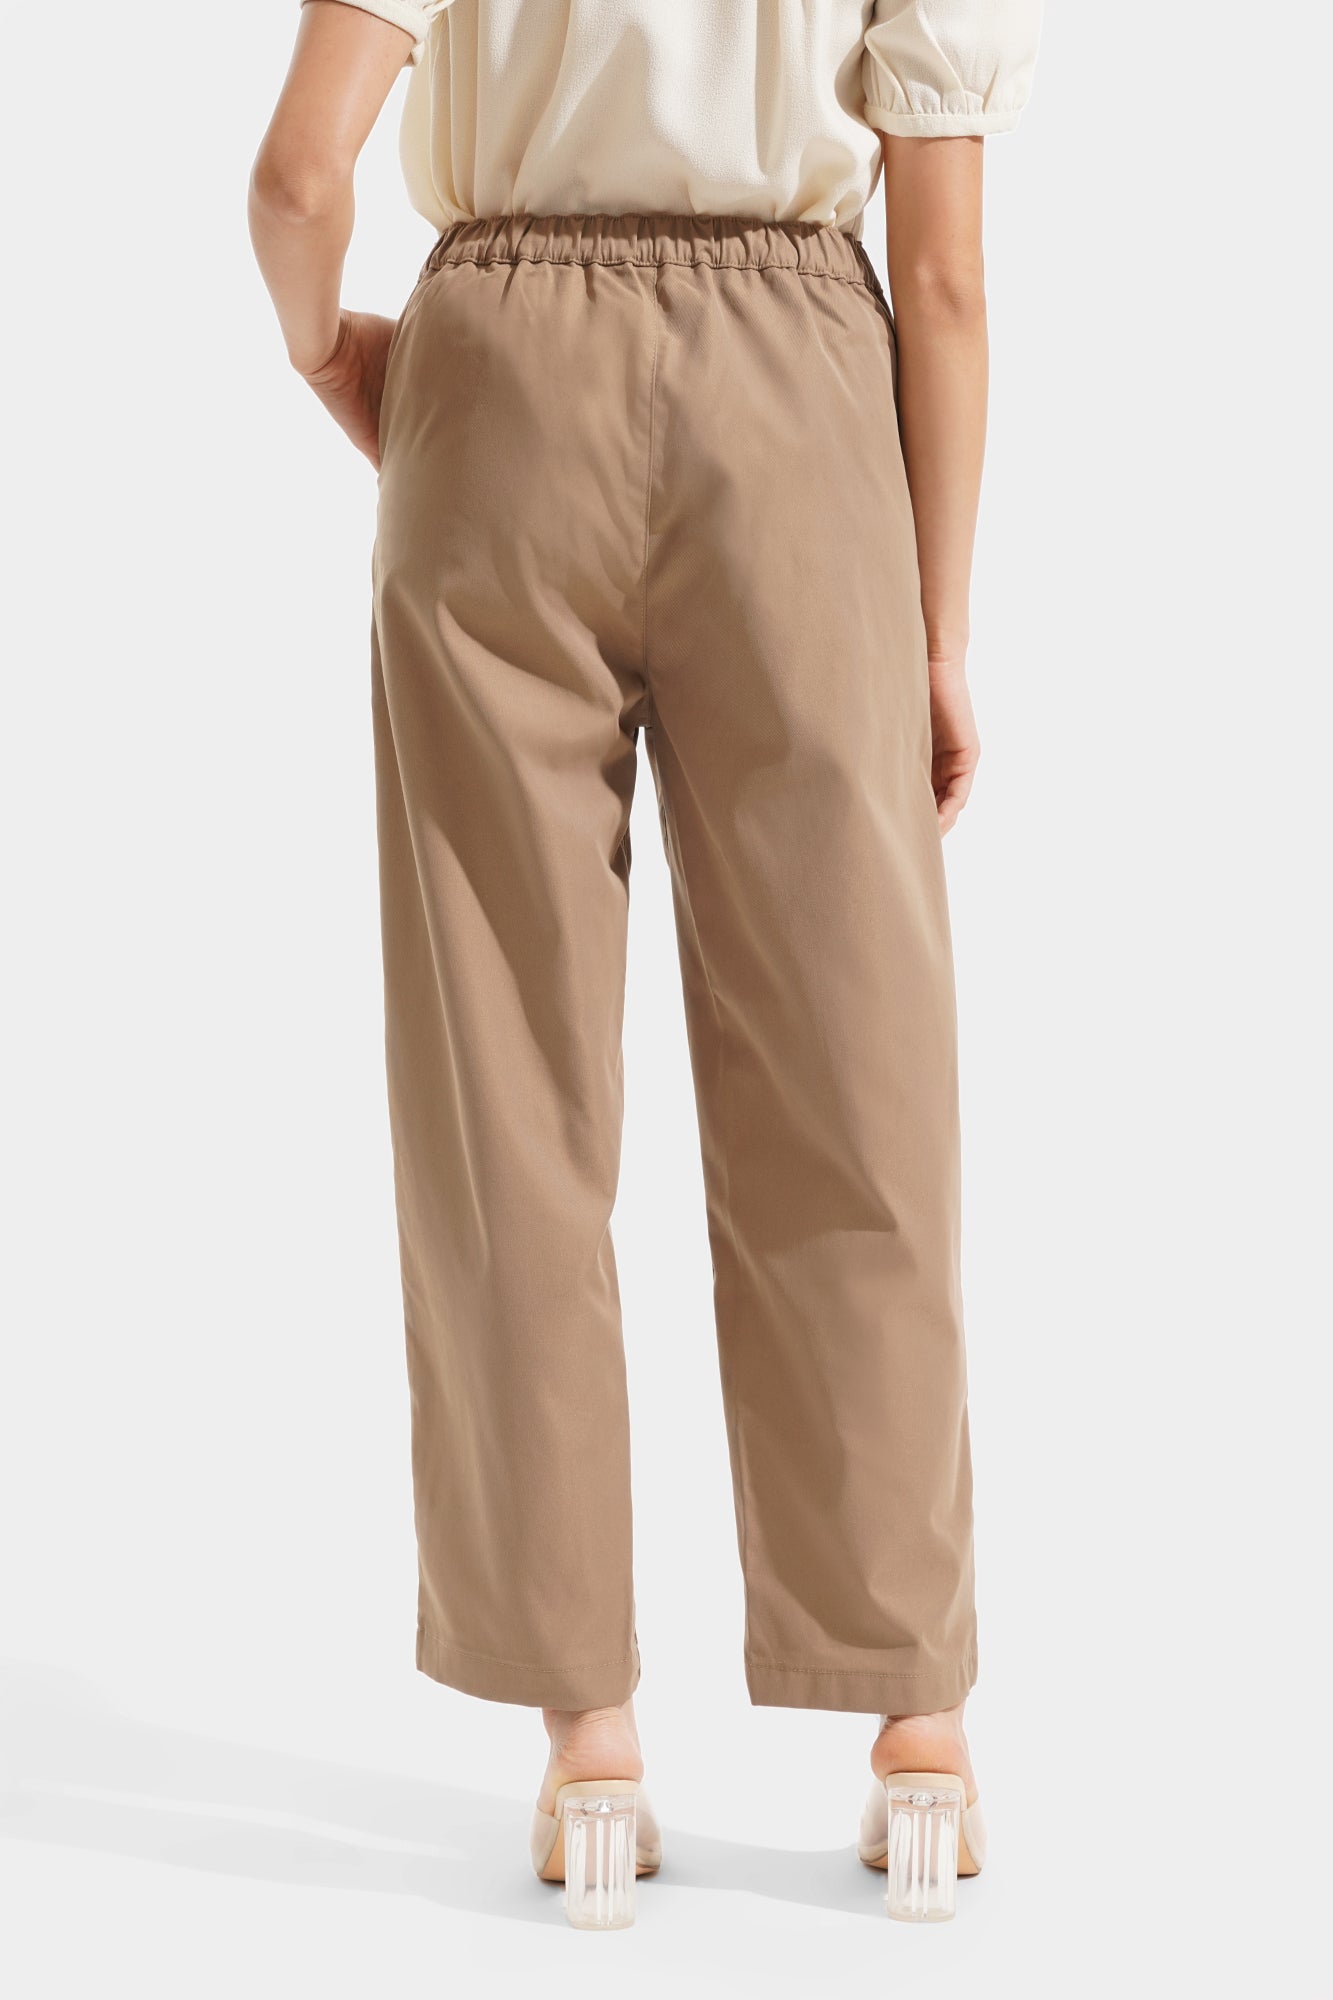 Smooth Series Full Length Cozy Pants